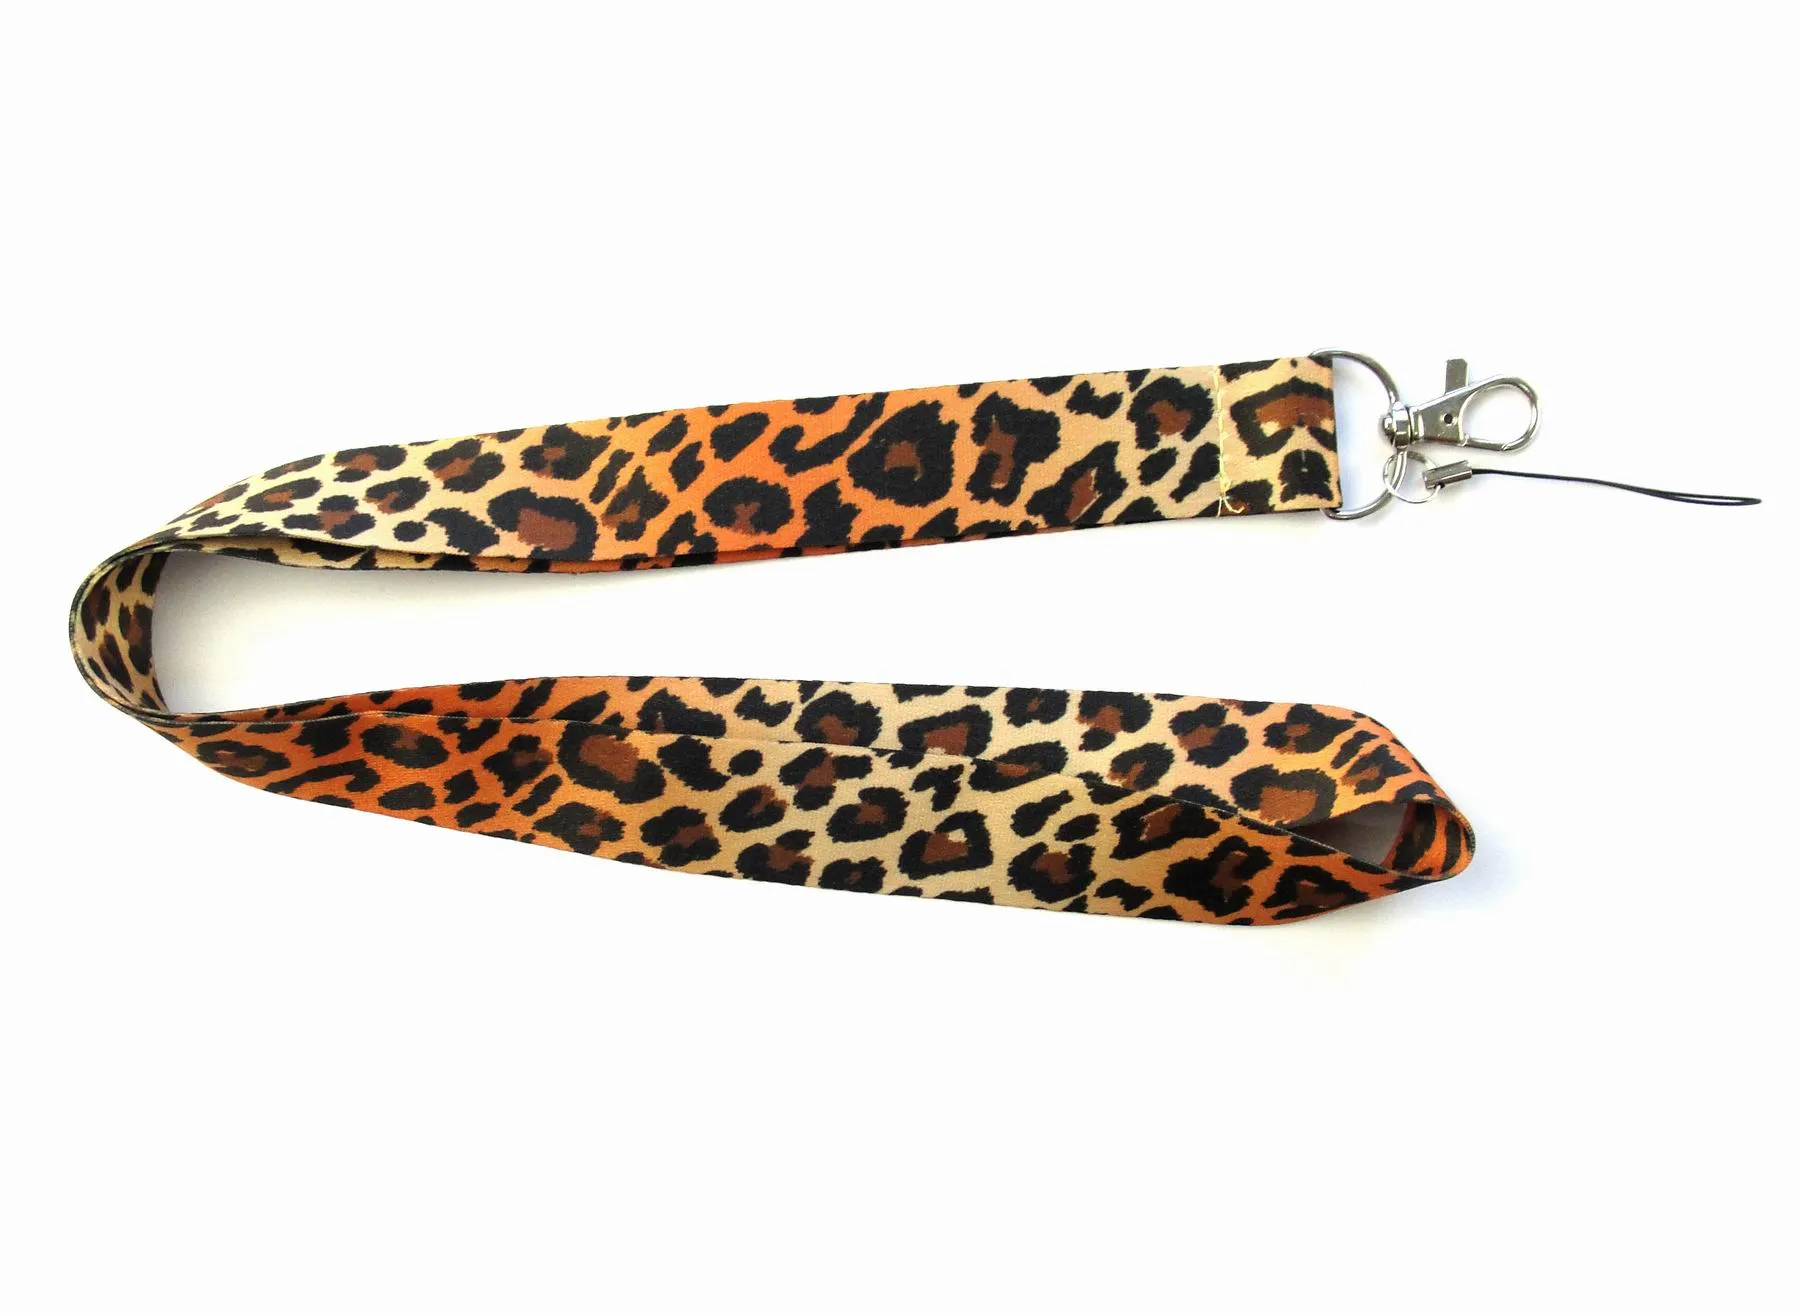 2021 Wholesale 20pcs Cell Phone Straps & Charms Leopard Styles Celebrity Lanyard Fashion Keys Mobile Neck ID Holders gift